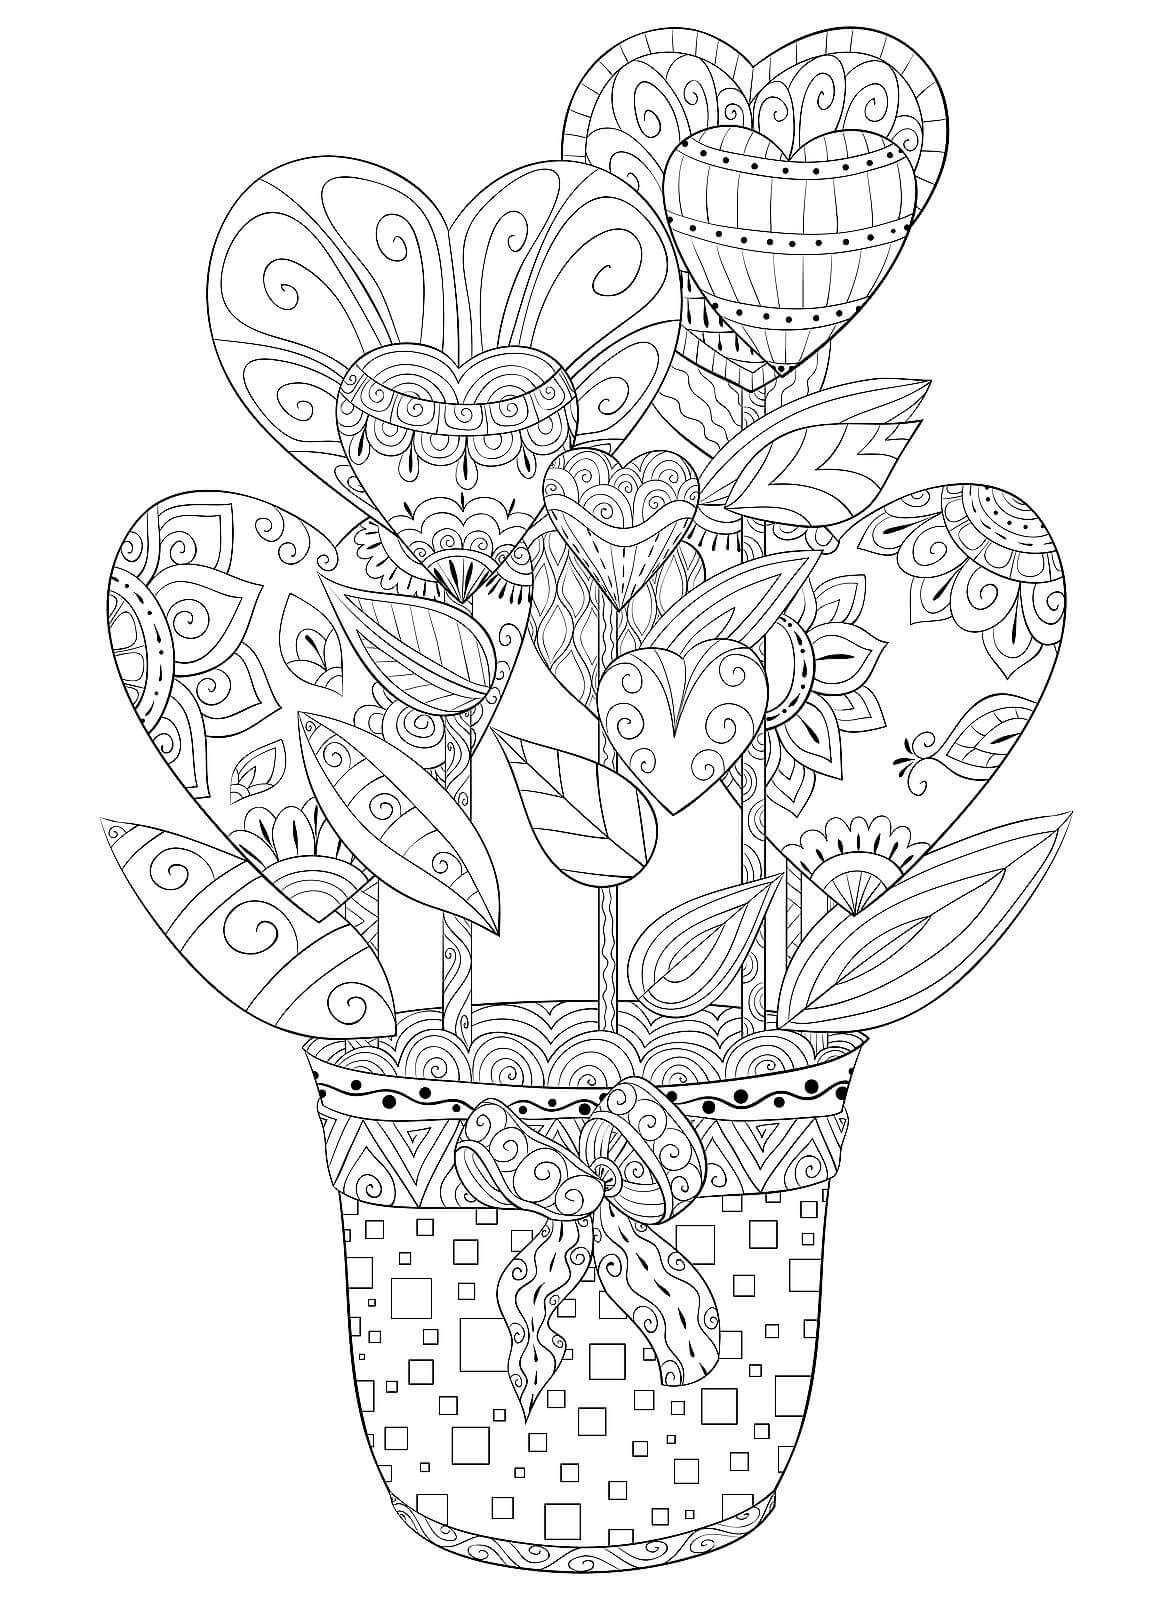 heart coloring pages anatomy | heart coloring pages for adults | heart coloring meaning